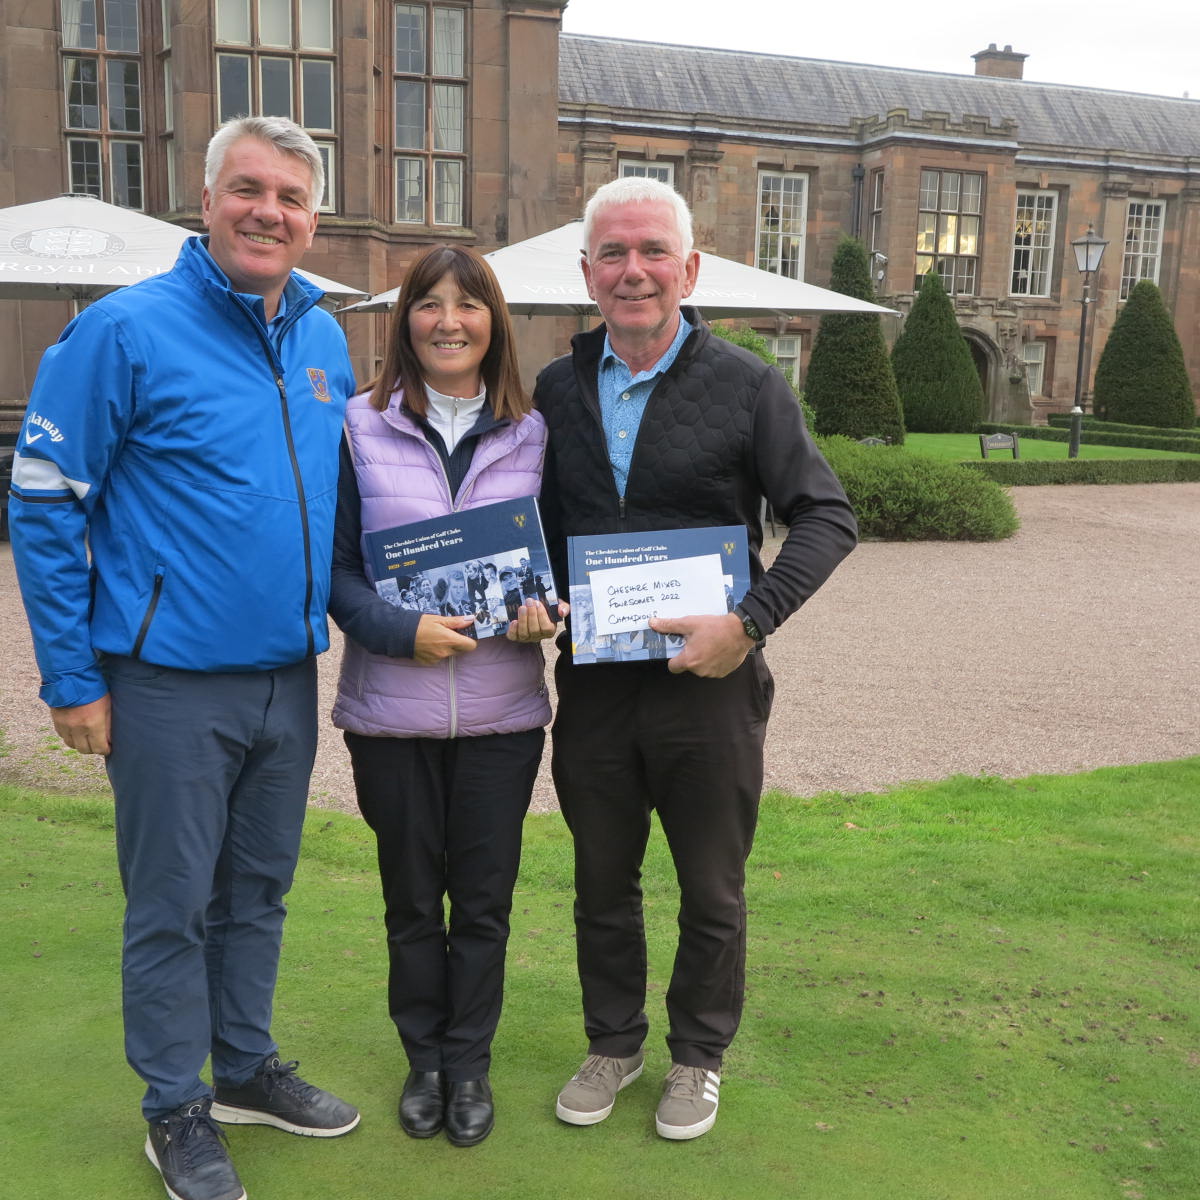 Cheshire Mixed Foursomes Championship 2022 – Barry Martin & Ann Scriven 1st place winners